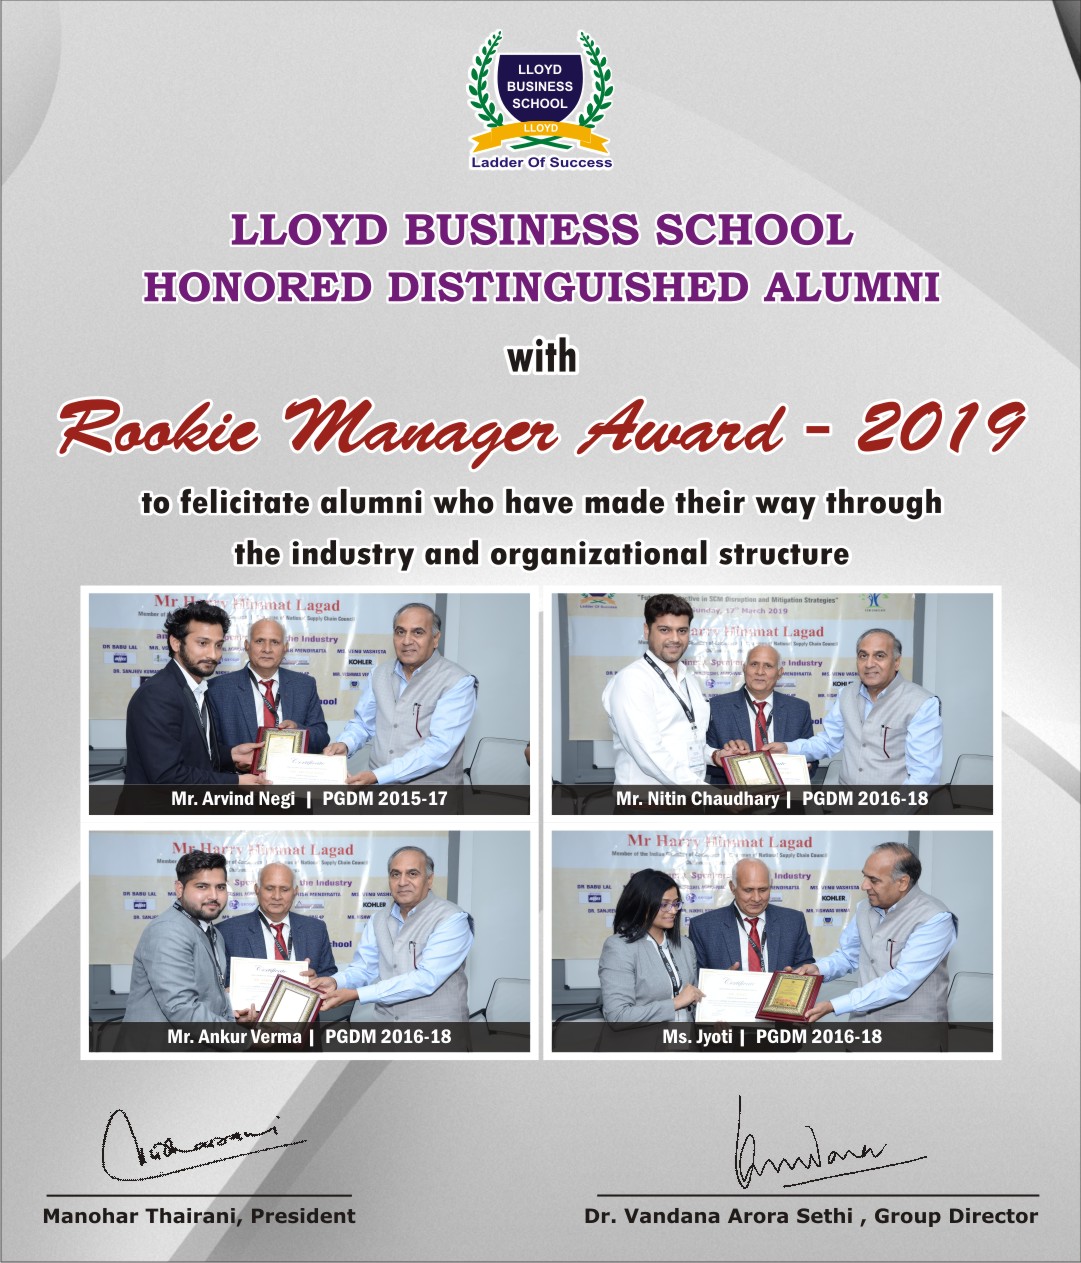 Rookie Manager Award – 2019